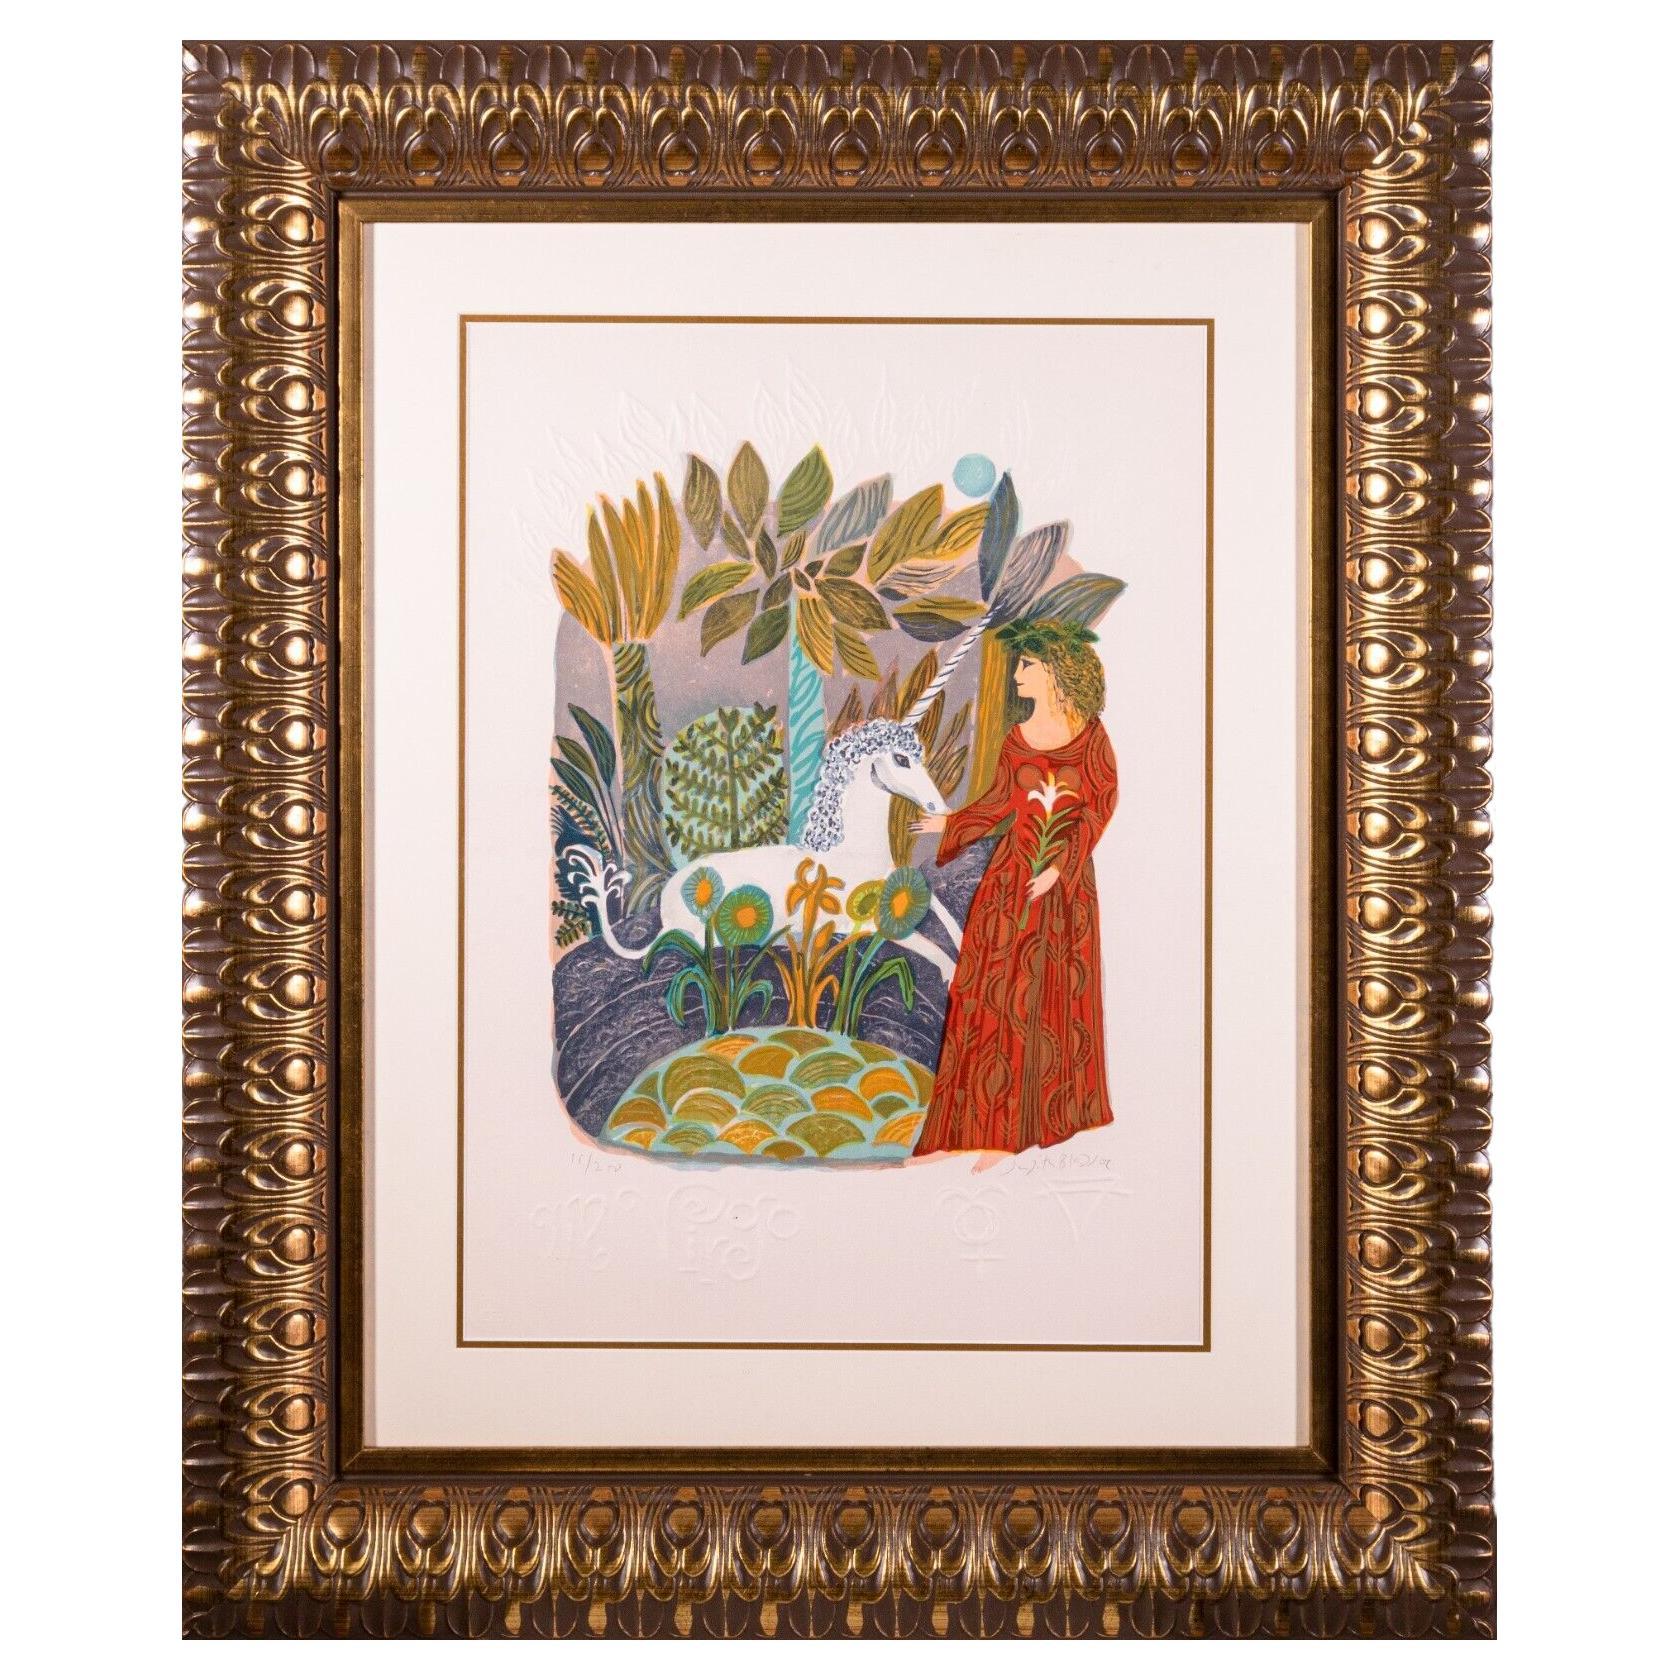 Judith Bledsoe Virgo Zodiac Hand Signed Contemporary Lithograph 55/250 Framed For Sale